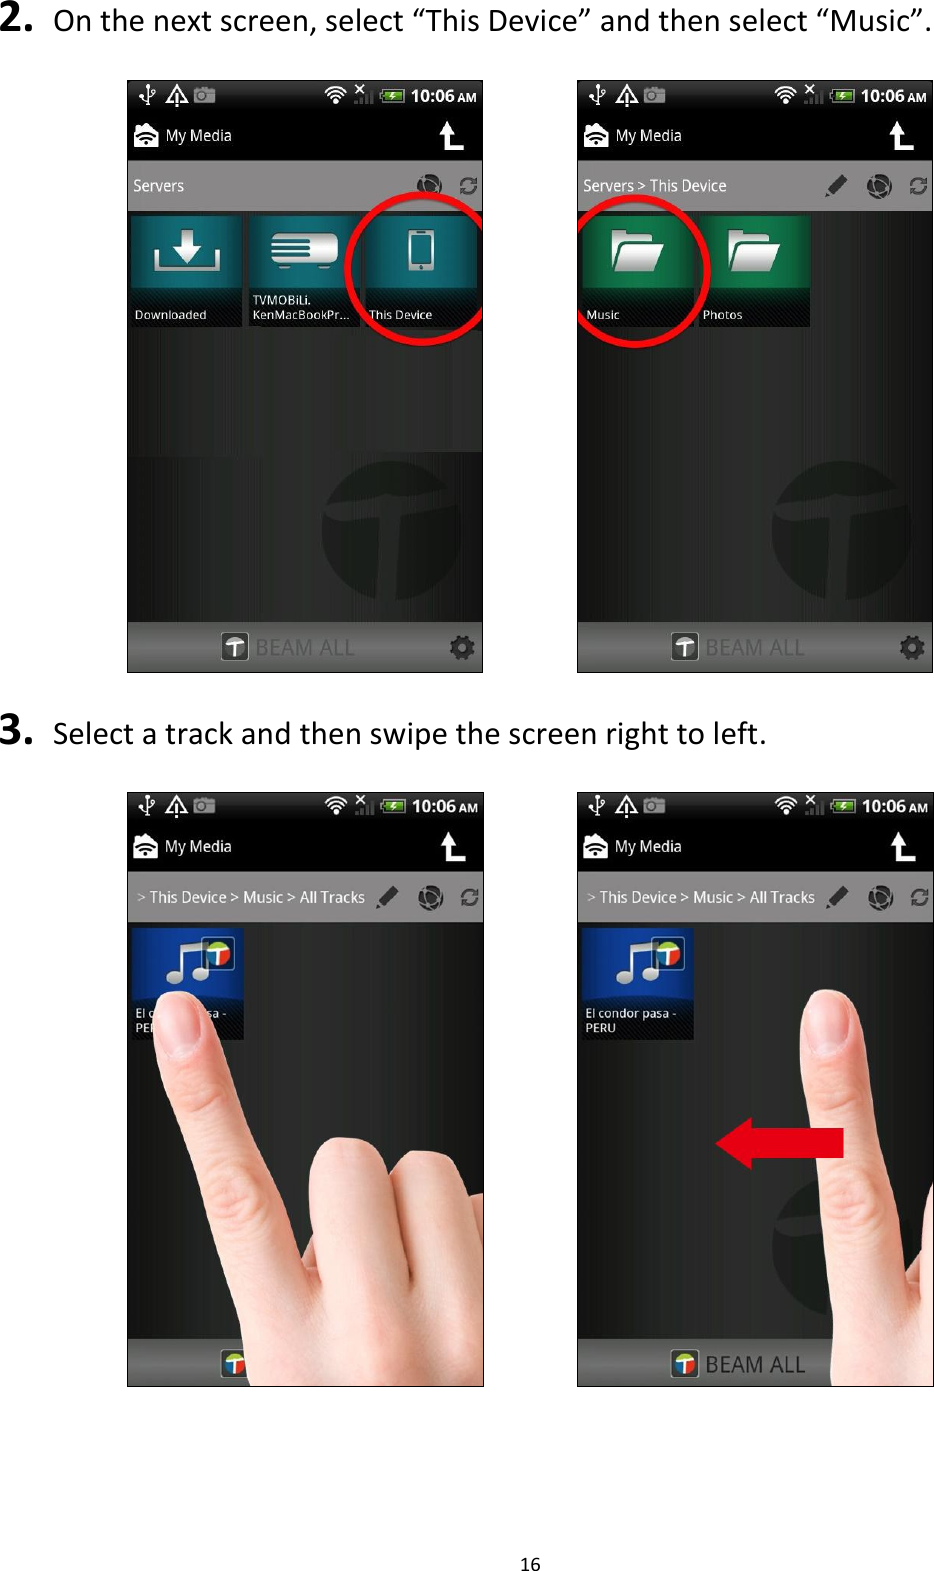 16  2.  On the next screen, select “This Device” and then select “Music”.        3.   Select a track and then swipe the screen right to left.        